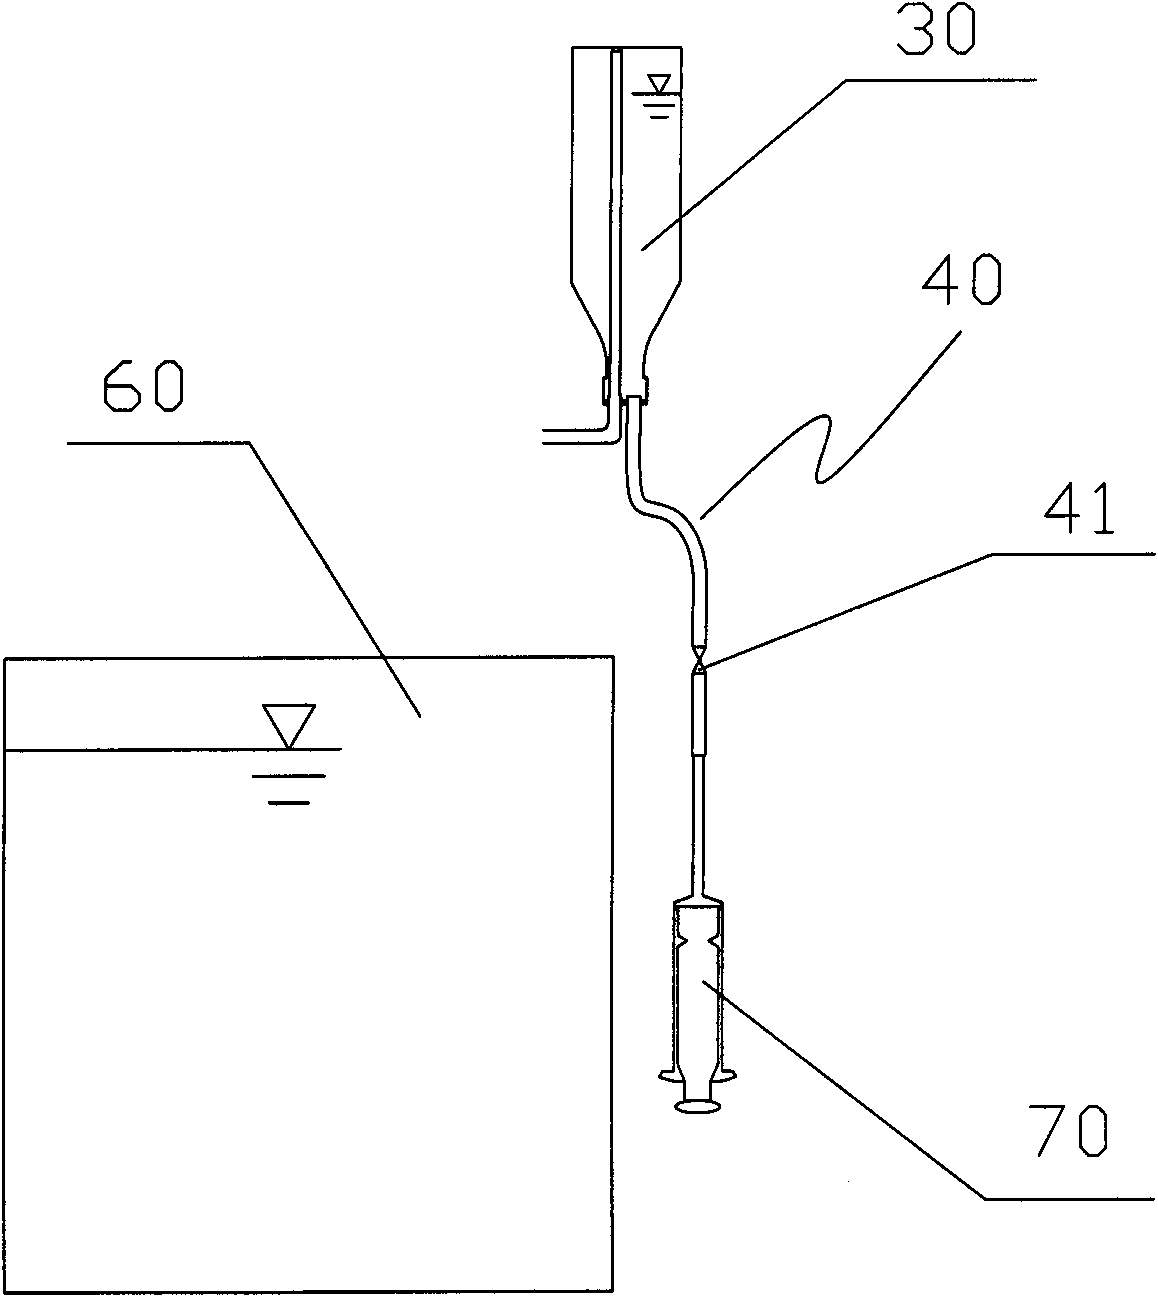 Method and device for sampling emergent gas in natural spring water